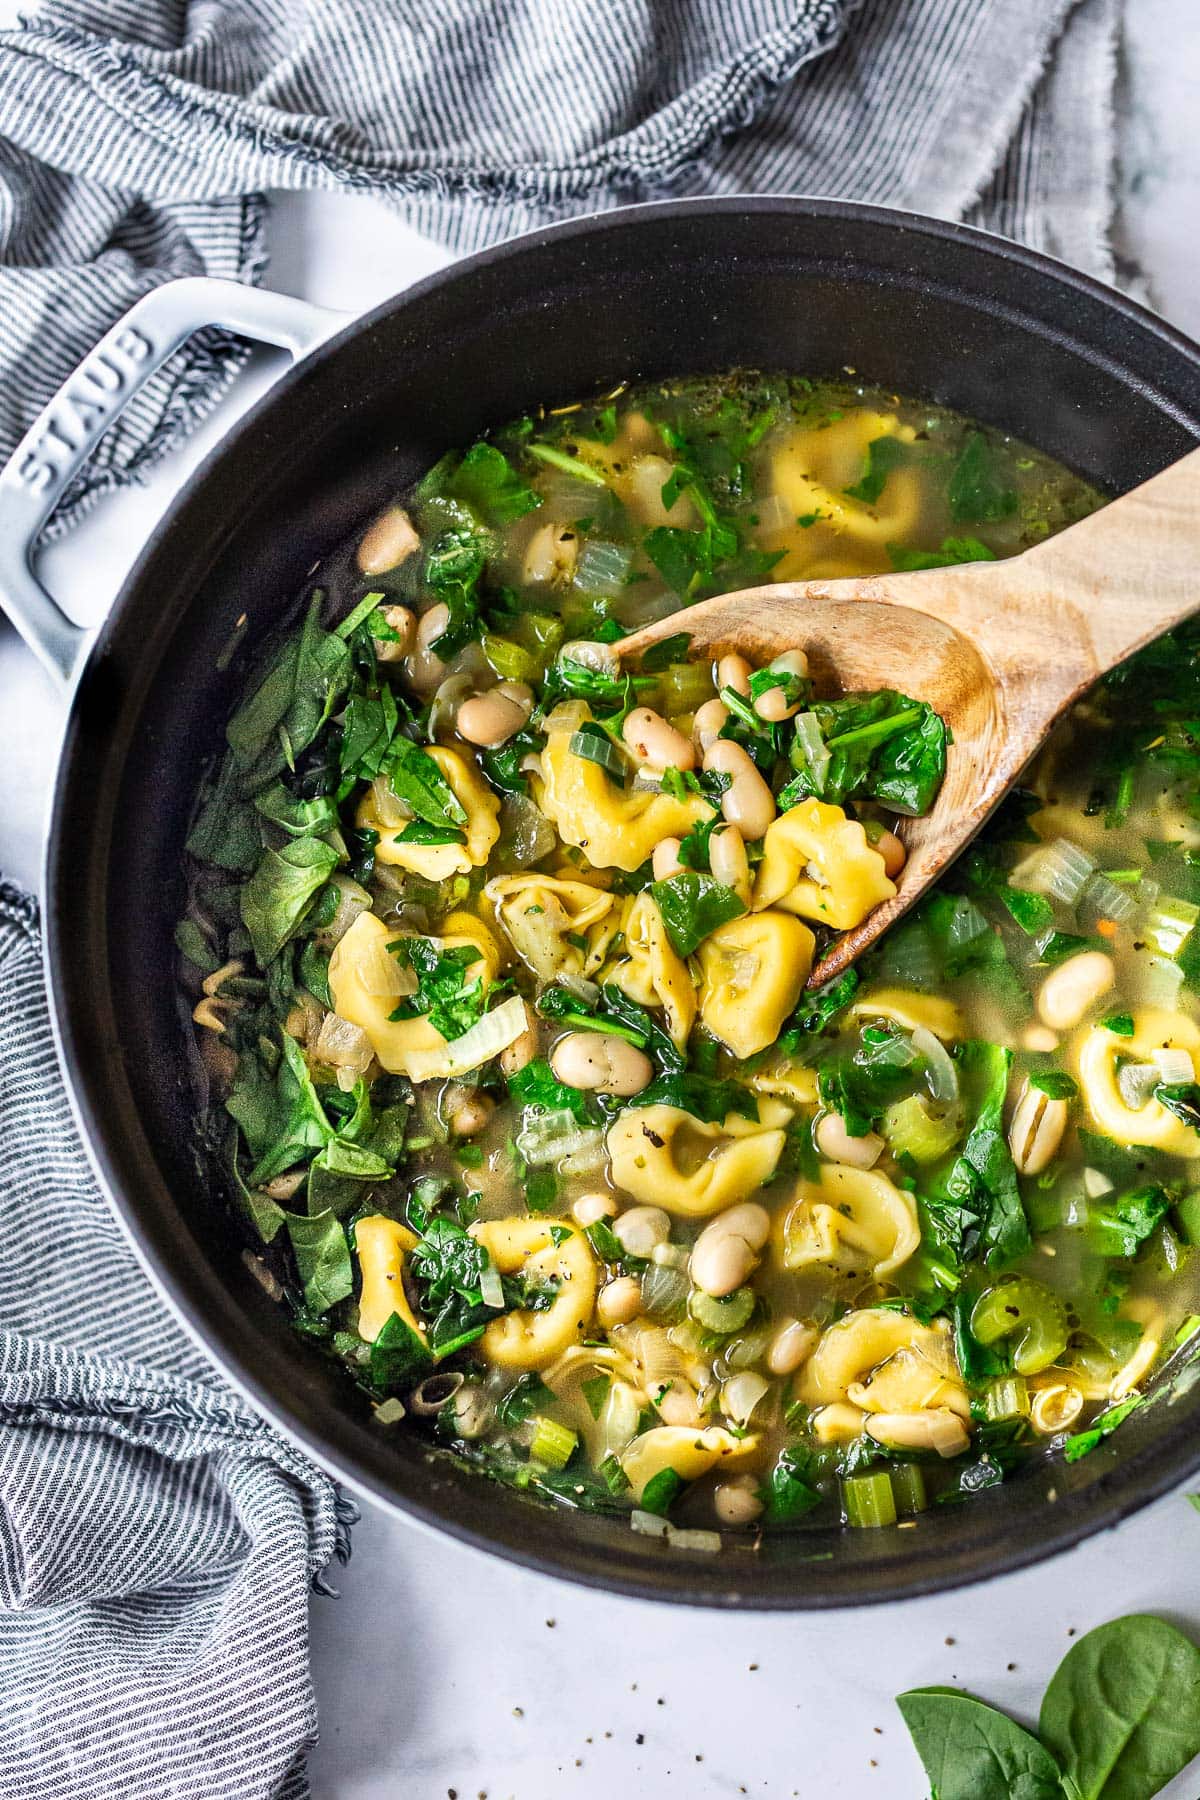  Tortellini Soup Recipe with Spinach, Basil, and white beans in a dutch oven with a wood spoon.